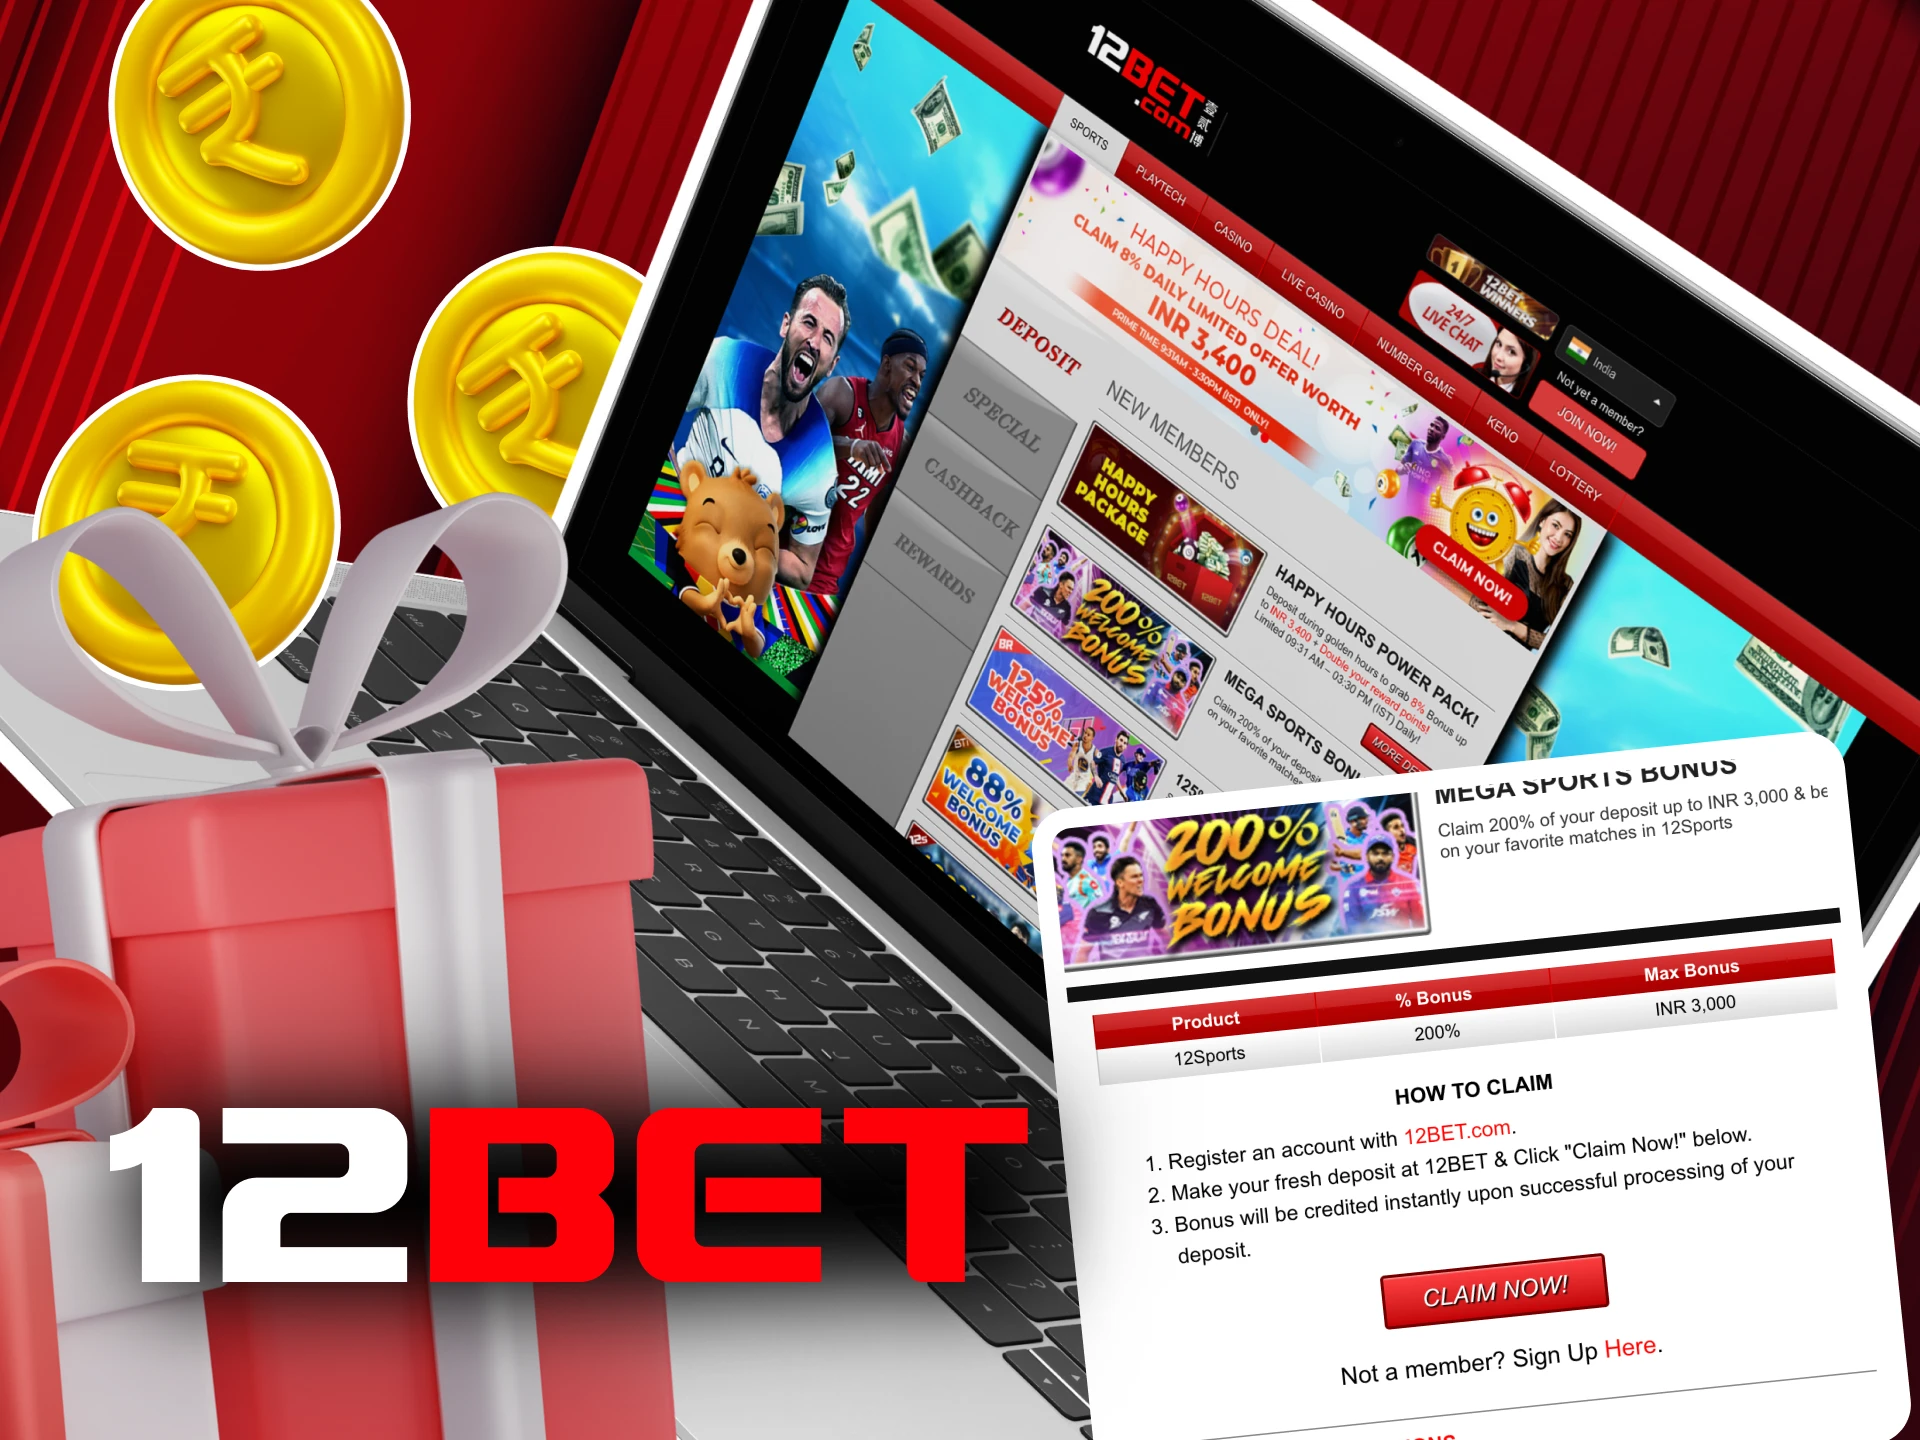 What bonuses are there for players at the 12bet online casino.